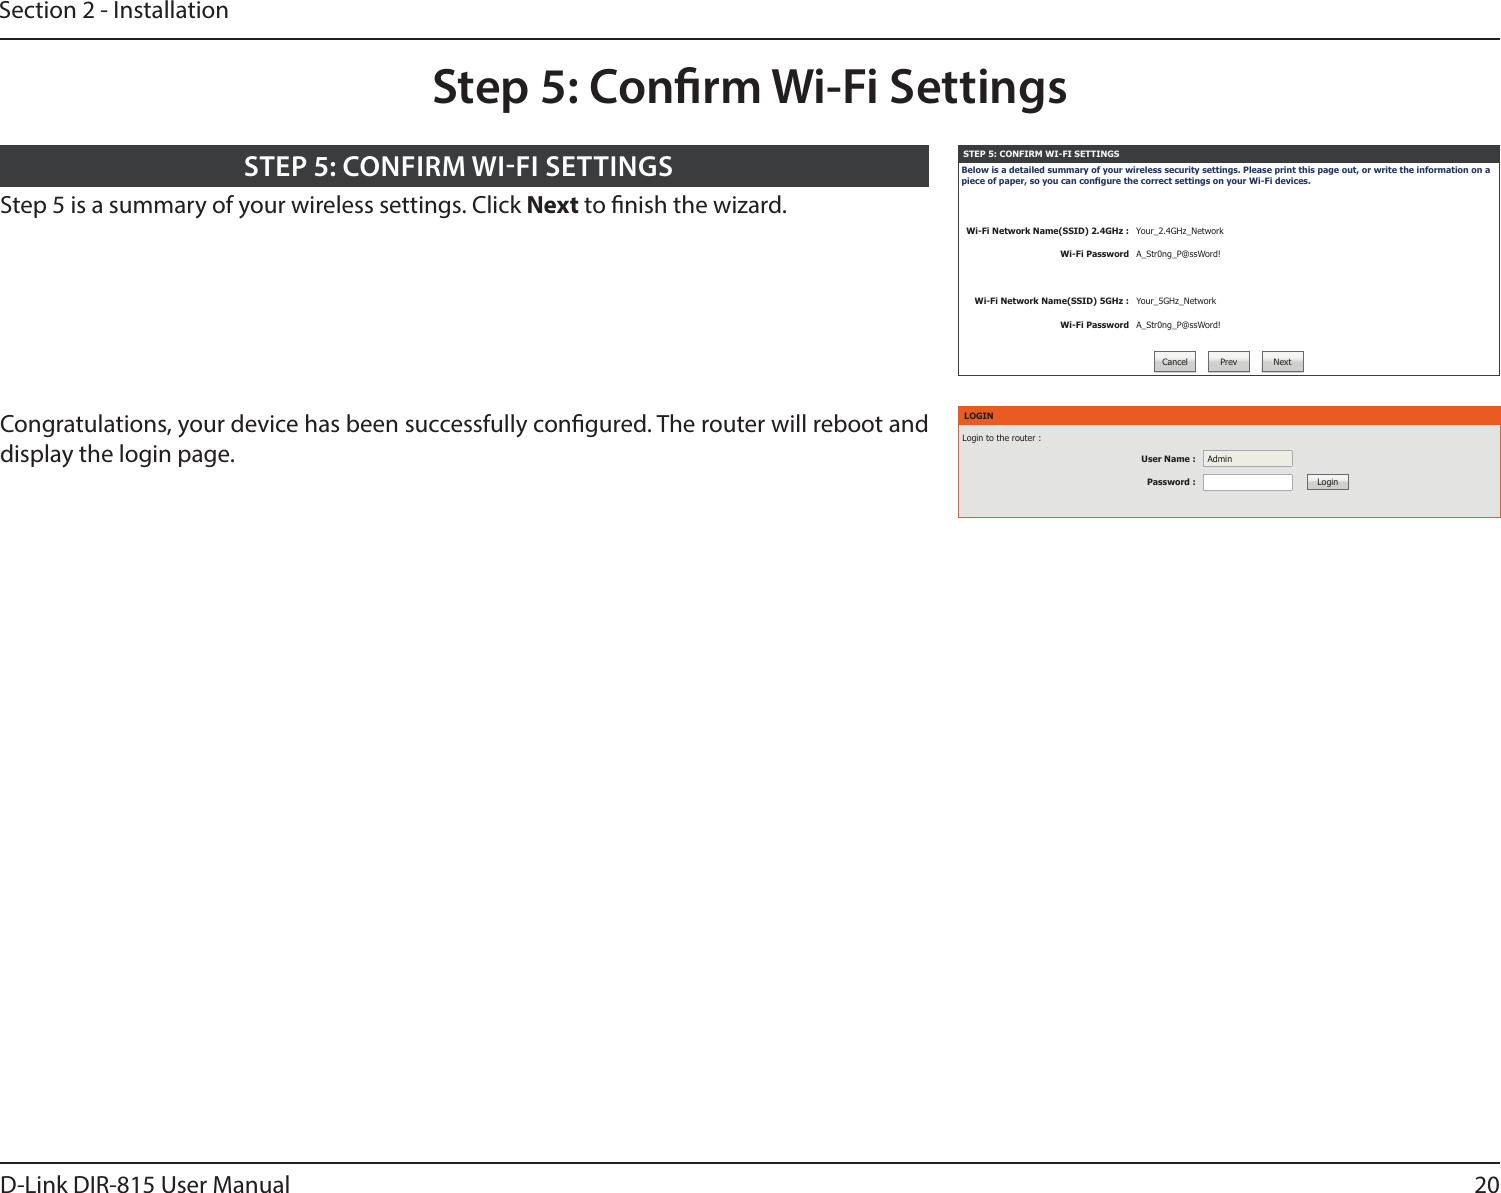 20D-Link DIR-815 User ManualSection 2 - InstallationStep 5: Conrm Wi-Fi SettingsSTEP 5: CONFIRM WI-FI SETTINGSBelow is a detailed summary of your wireless security settings. Please print this page out, or write the information on a piece of paper, so you can congure the correct settings on your Wi-Fi devices.Wi-Fi Network Name(SSID) 2.4GHz : Your_2.4GHz_NetworkWi-Fi Password A_Str0ng_P@ssWord!Wi-Fi Network Name(SSID) 5GHz : Your_5GHz_NetworkWi-Fi Password A_Str0ng_P@ssWord!Cancel Prev NextStep 5 is a summary of your wireless settings. Click Next to nish the wizard. STEP 5: CONFIRM WIFI SETTINGSLOGINLogin to the router :User Name : AdminPassword : LoginCongratulations, your device has been successfully congured. The router will reboot and display the login page.